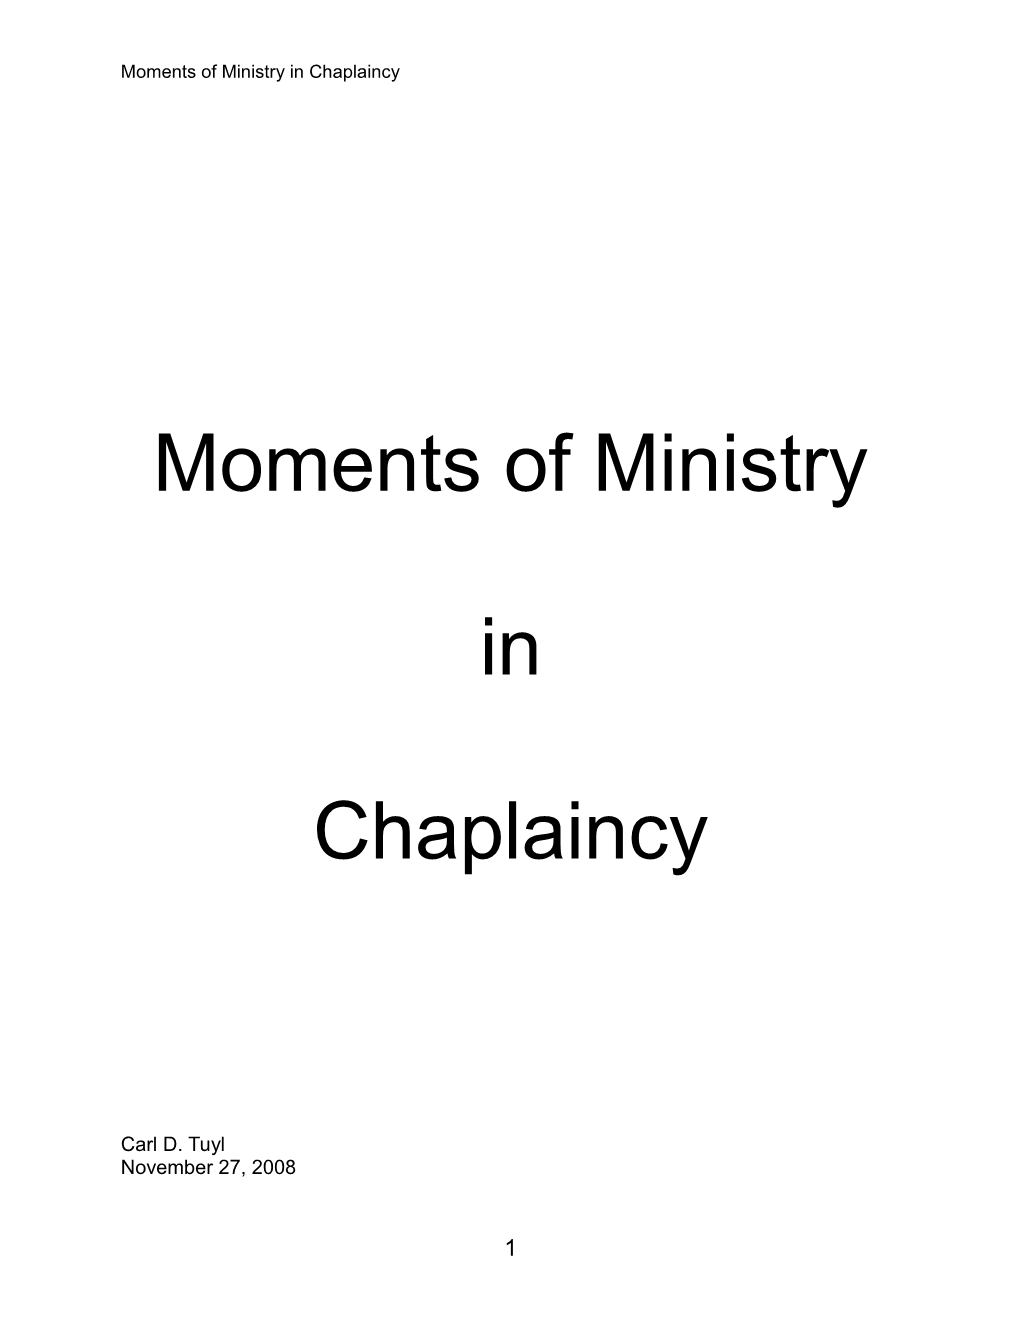 Moments of Ministry in Chaplaincy